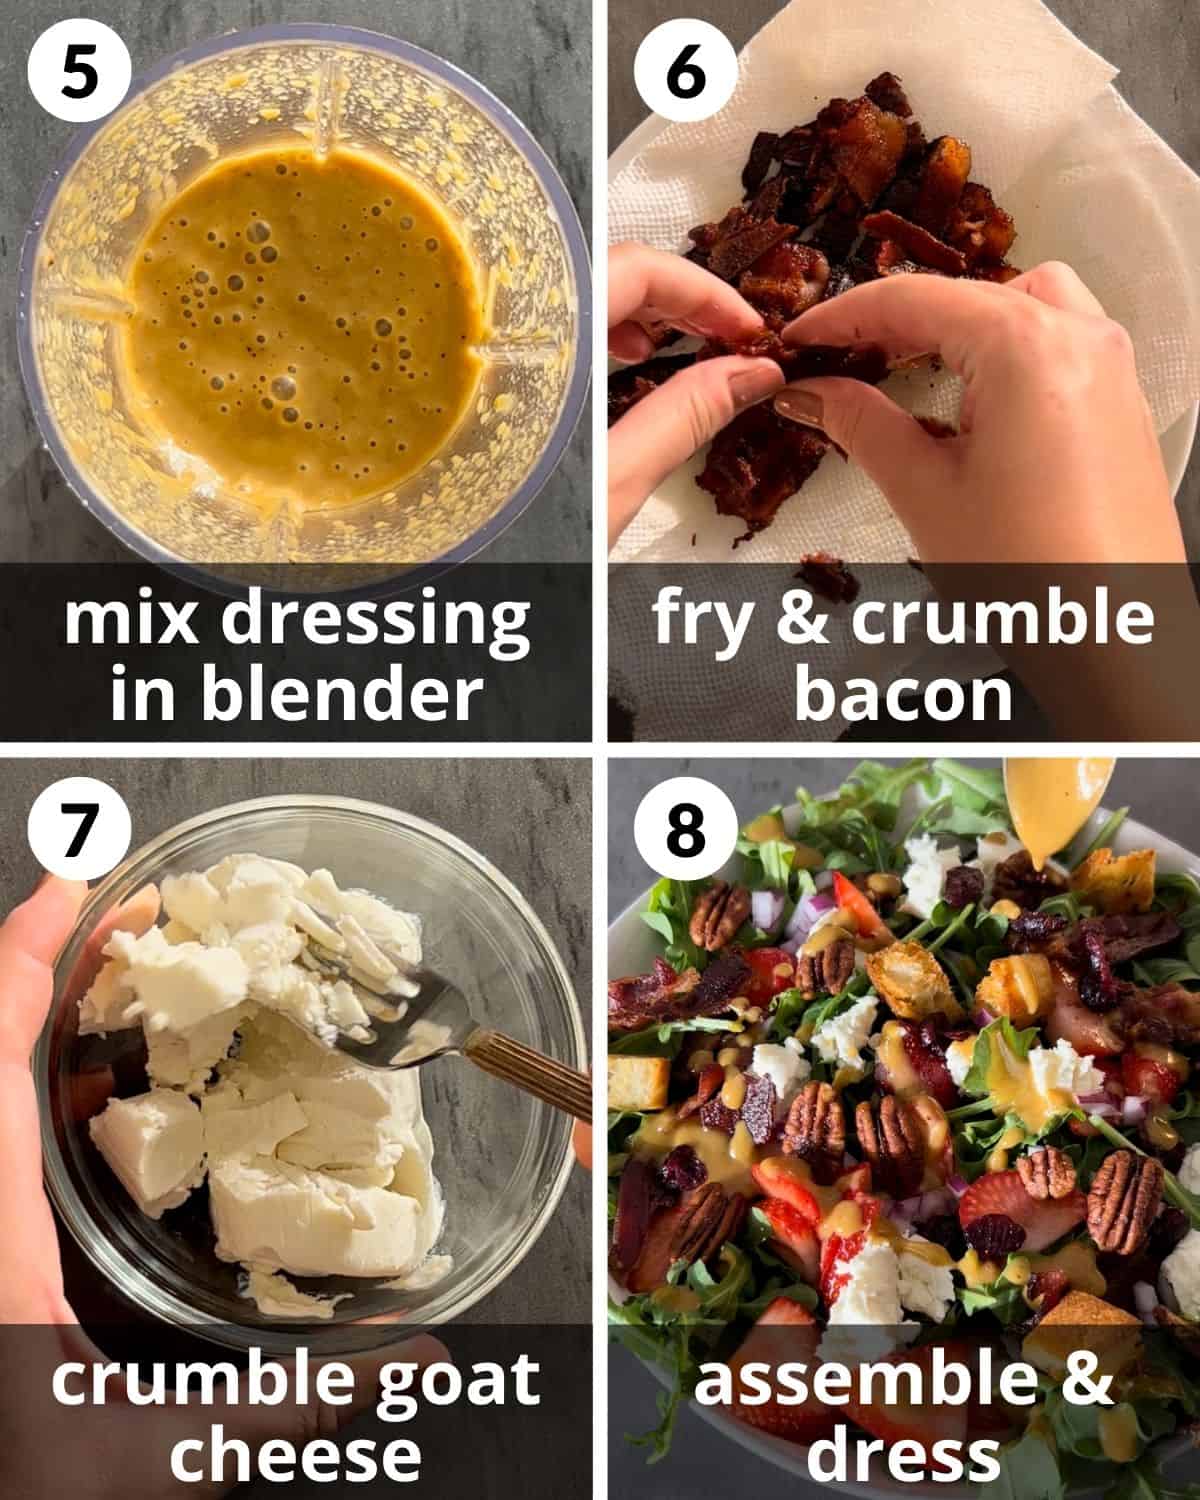 A 4 photo collage showing how to make the balsamic dressing.